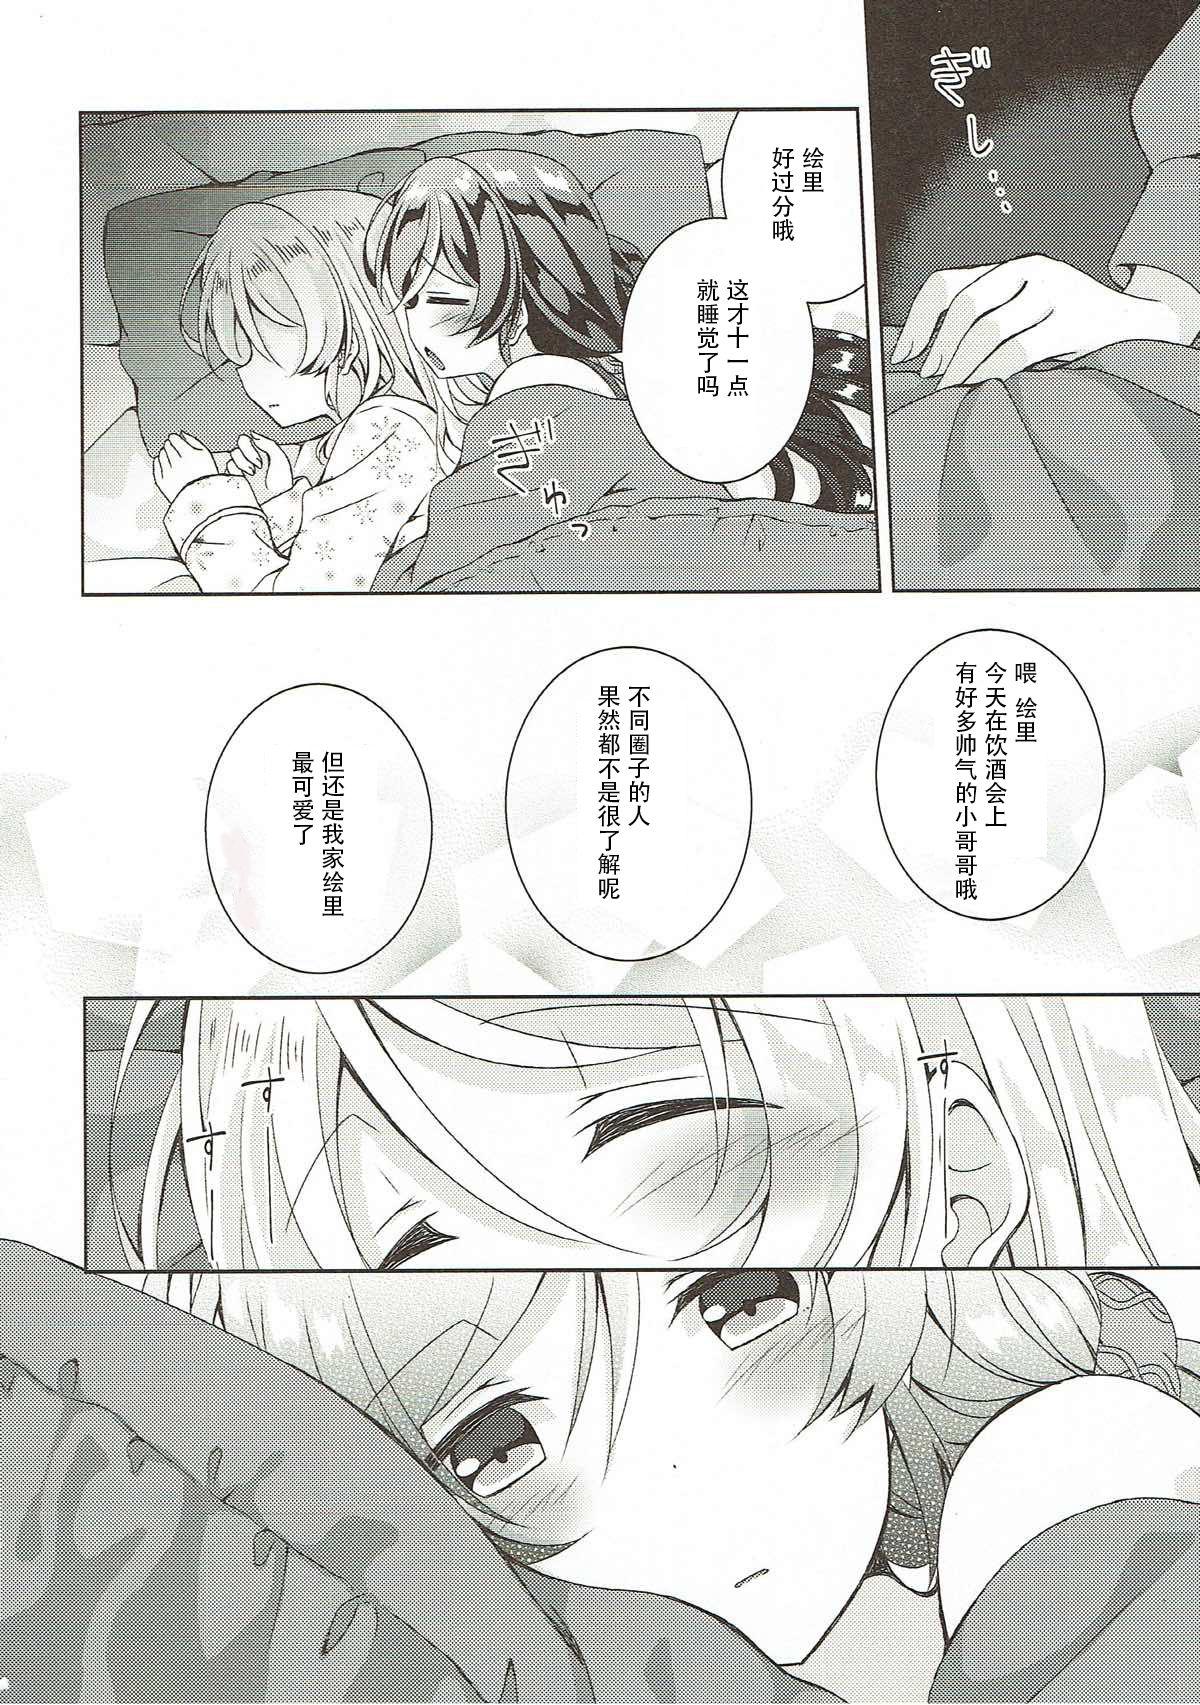 Caliente Sex to Uso to Yurikago to - Love live Gaypawn - Page 4